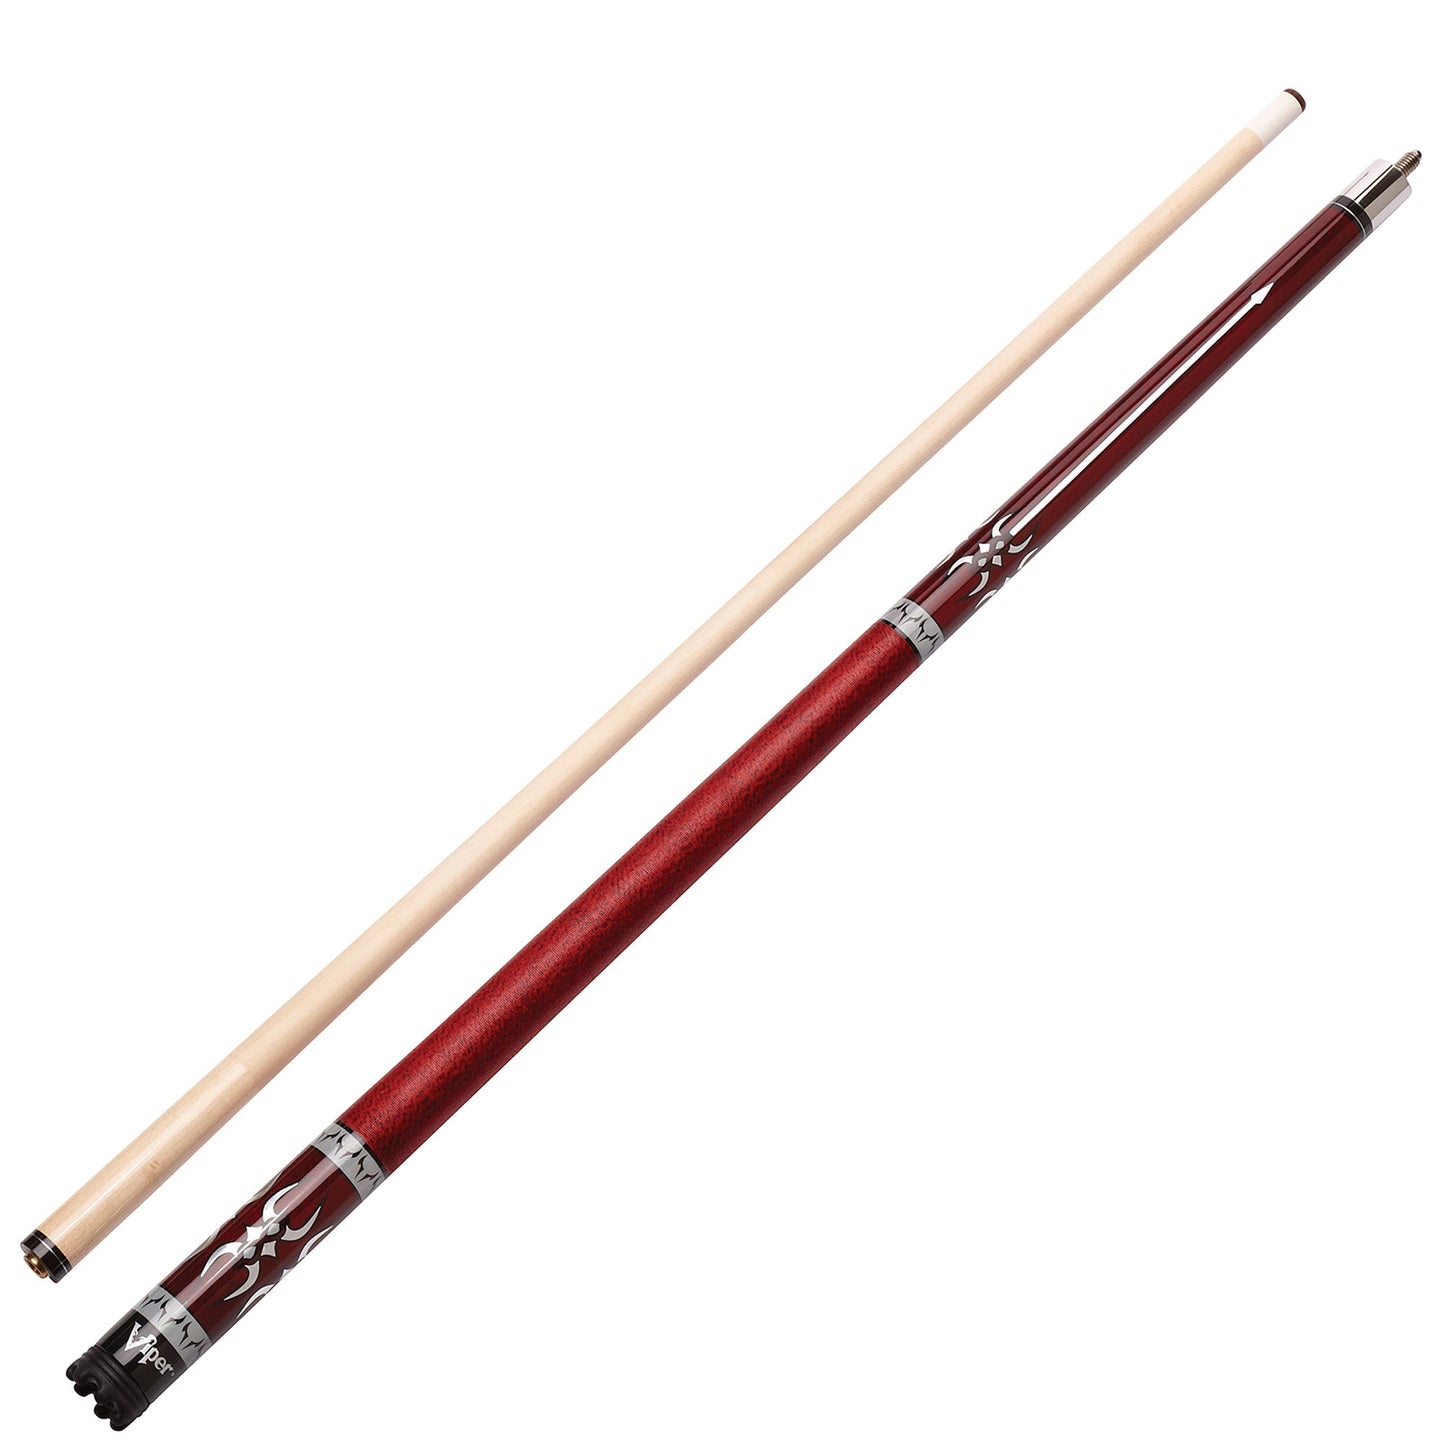 Viper Sinister Red Wrap pool Cue Stick 18 Ounce